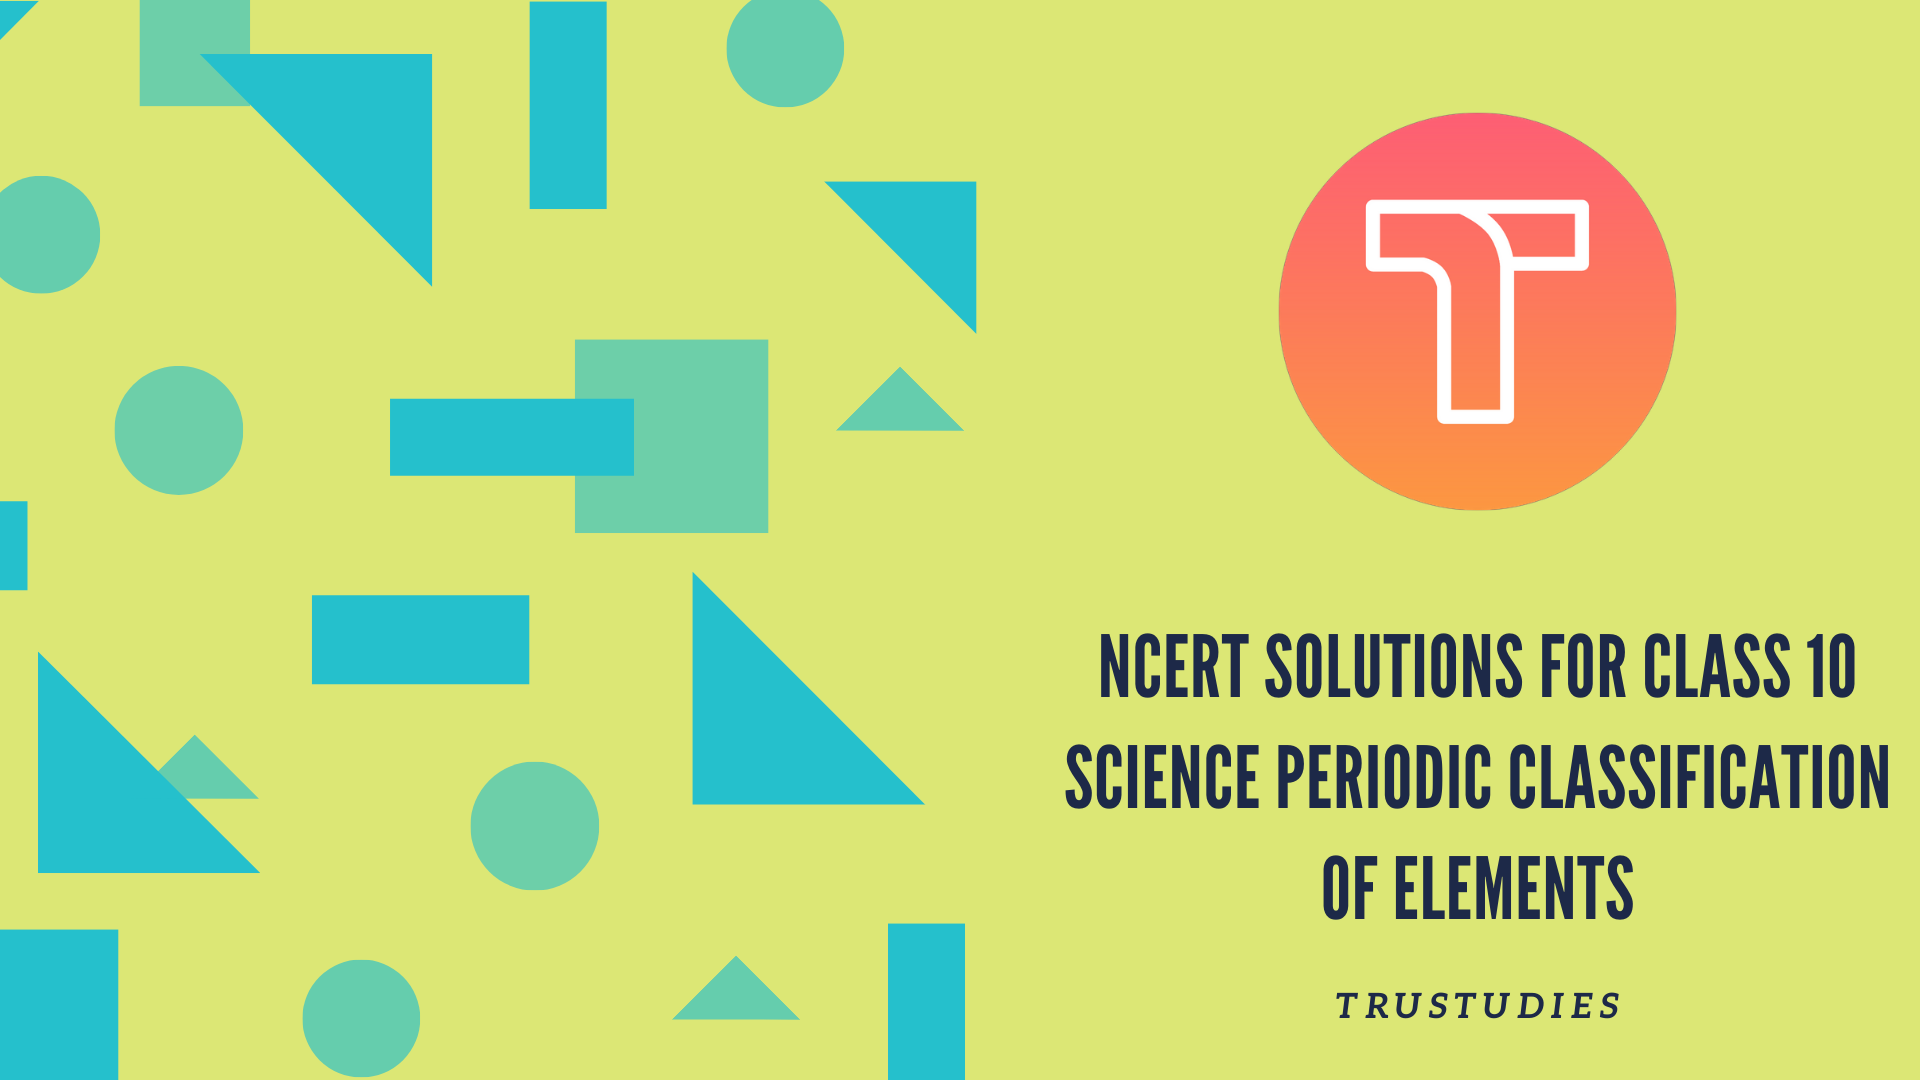 NCERT solutions for class 10 science chapter 5 periodic classification of elements banner image